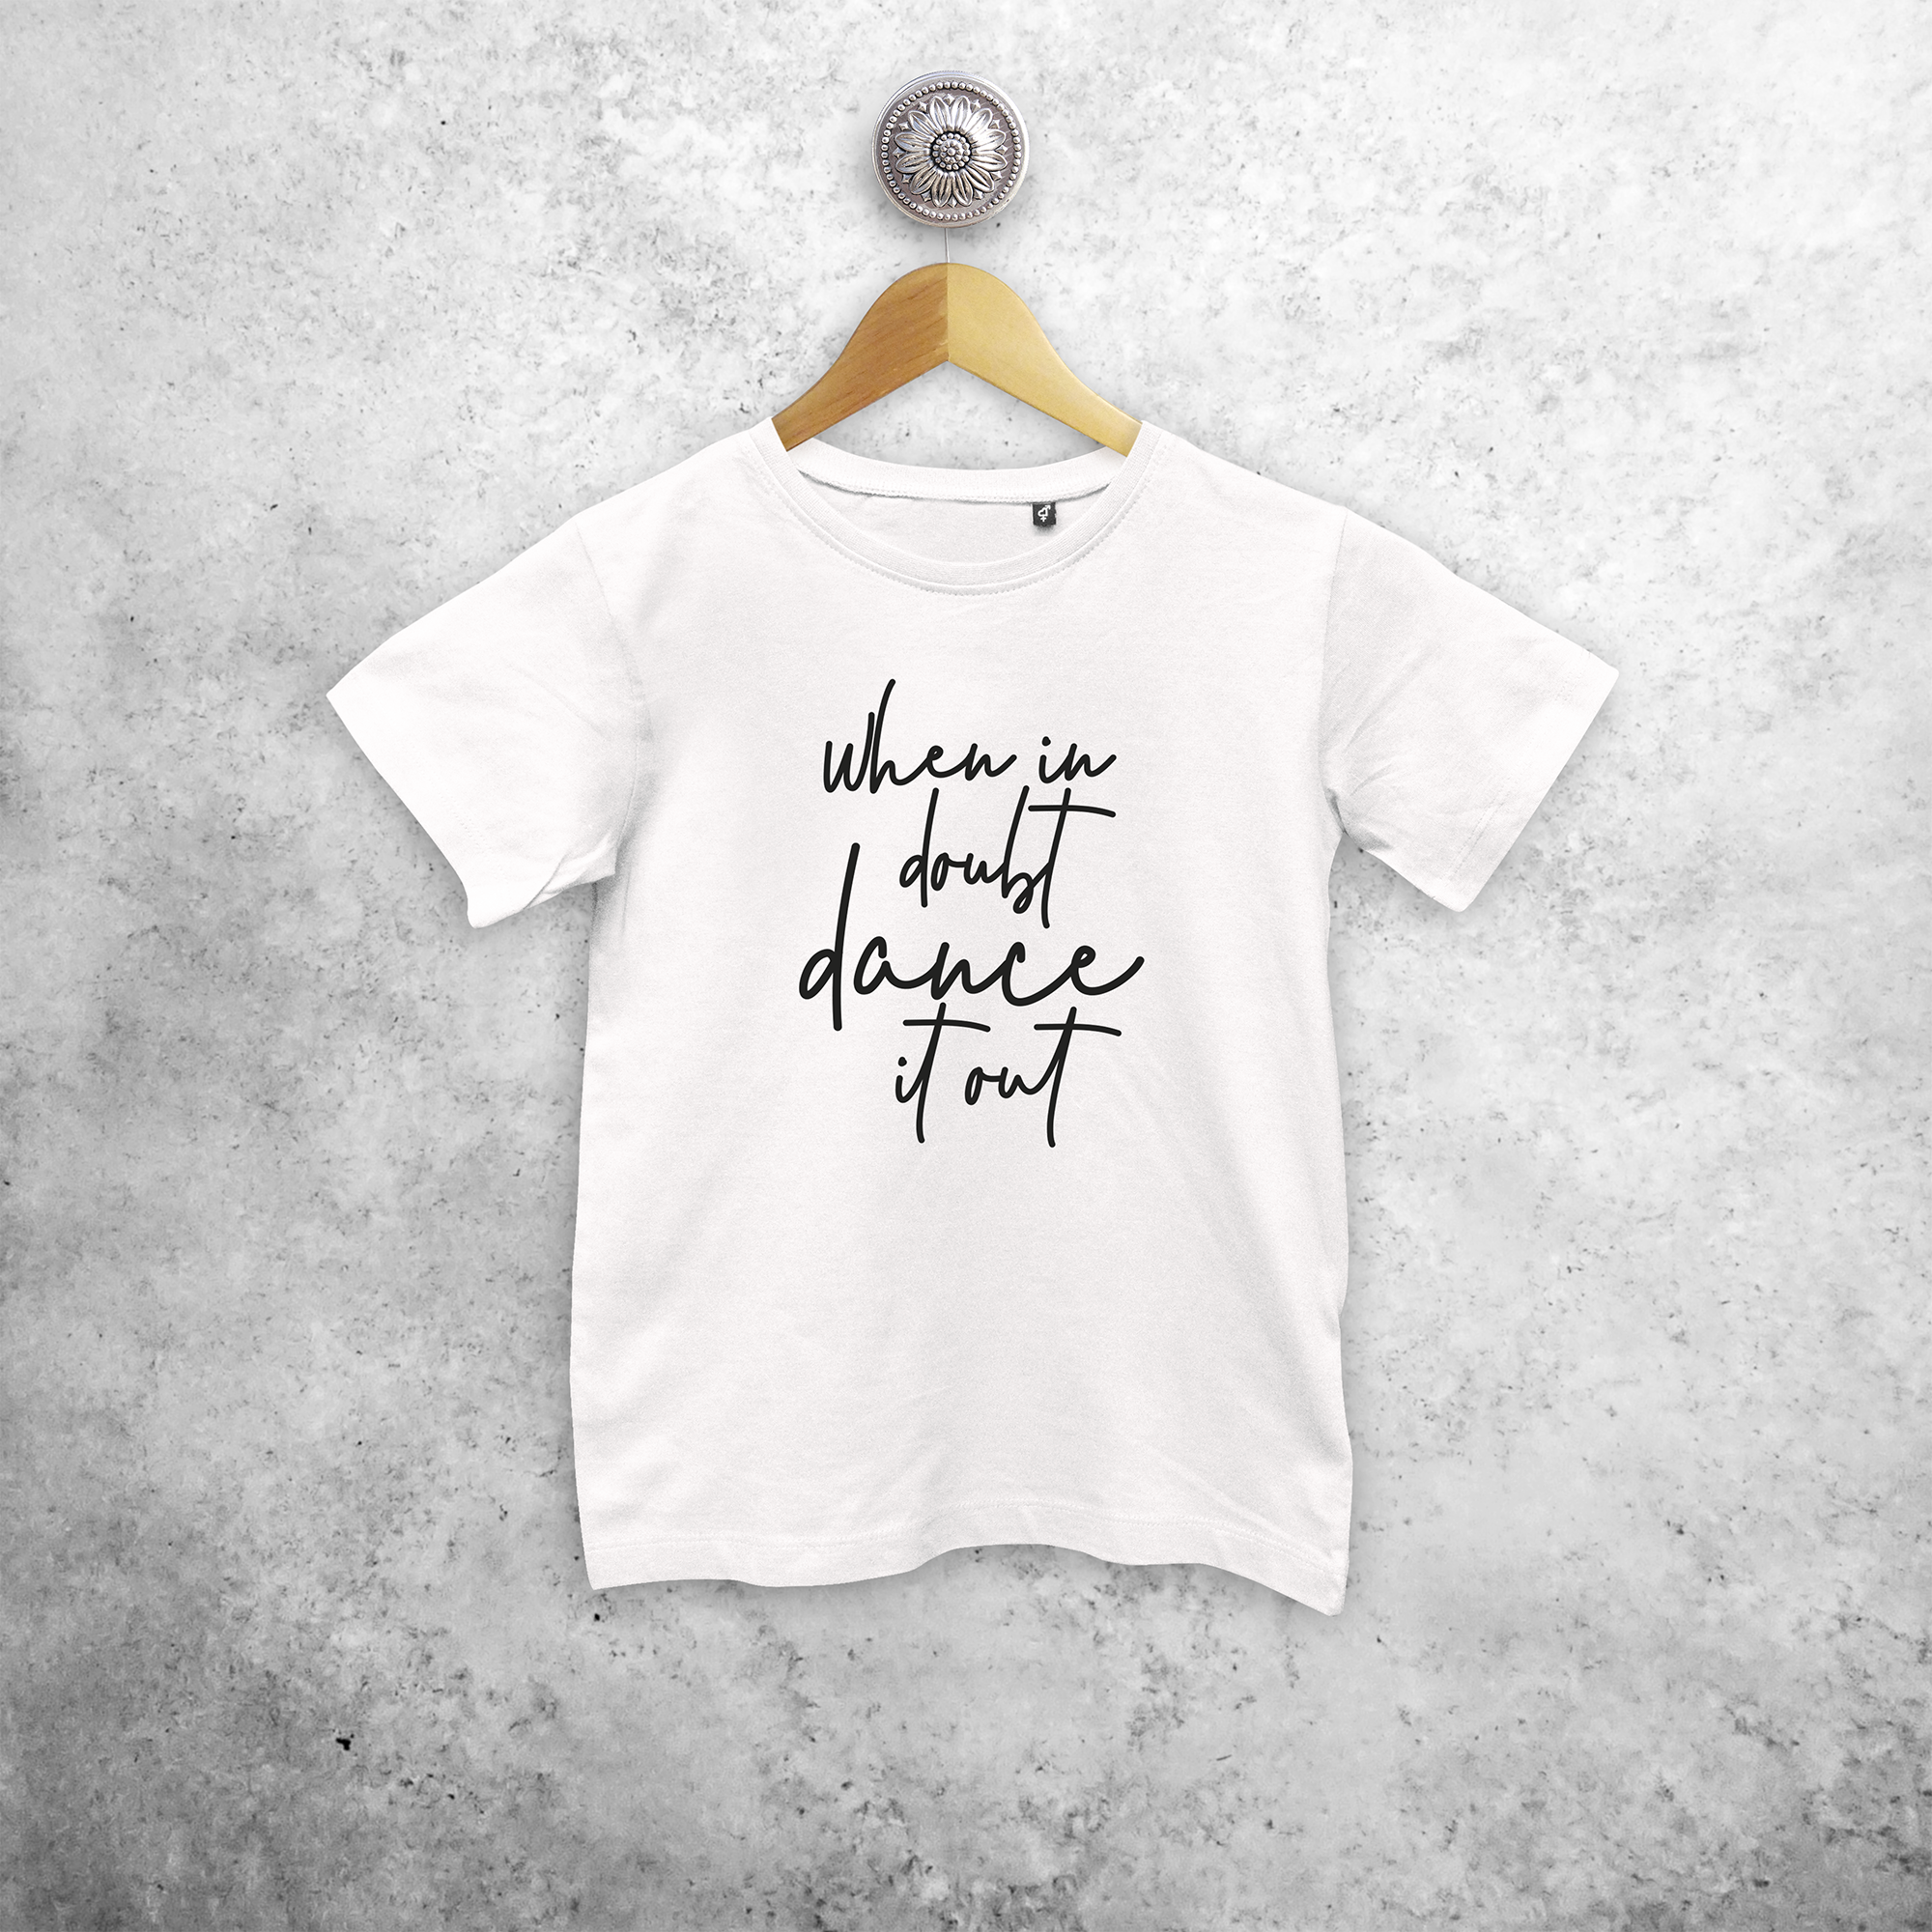 'When in doubt, dance it out' kids shortsleeve shirt